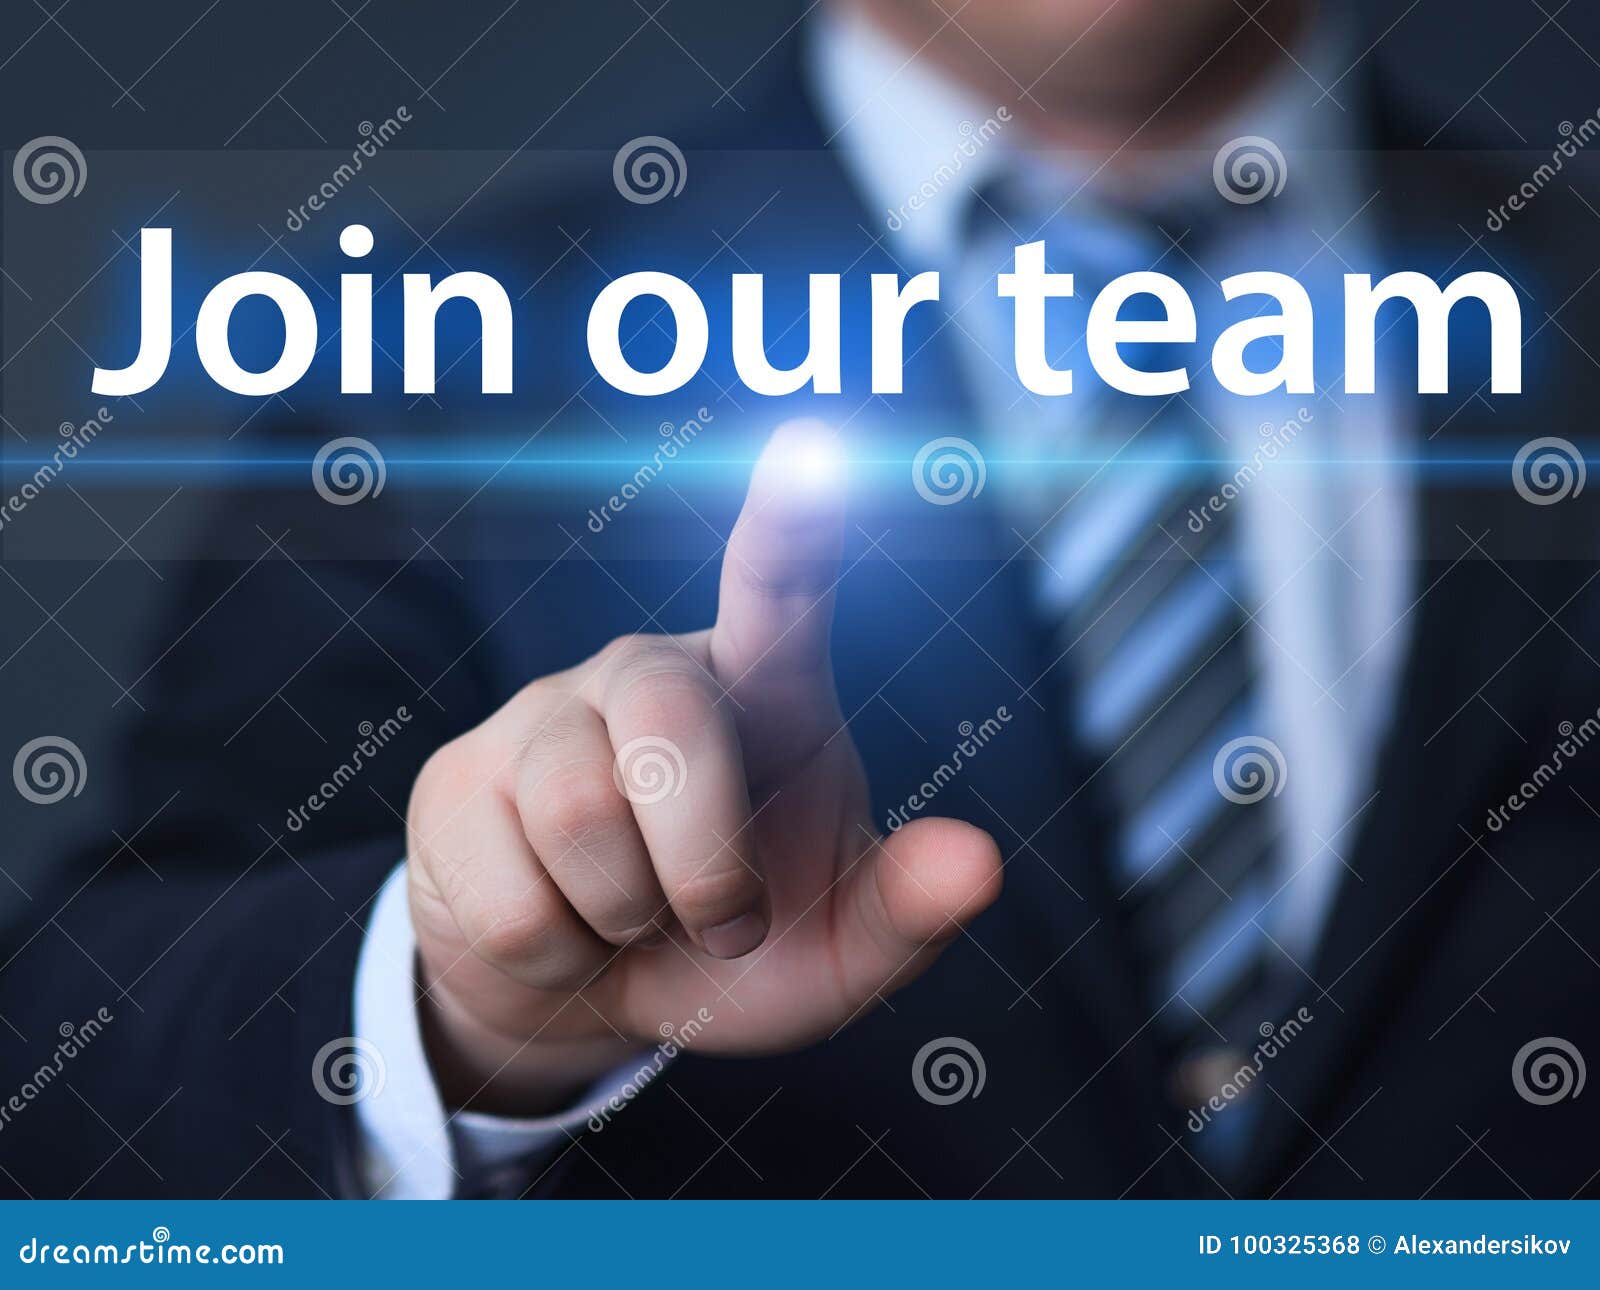 join our team job search career recruitment hiring business internet concept